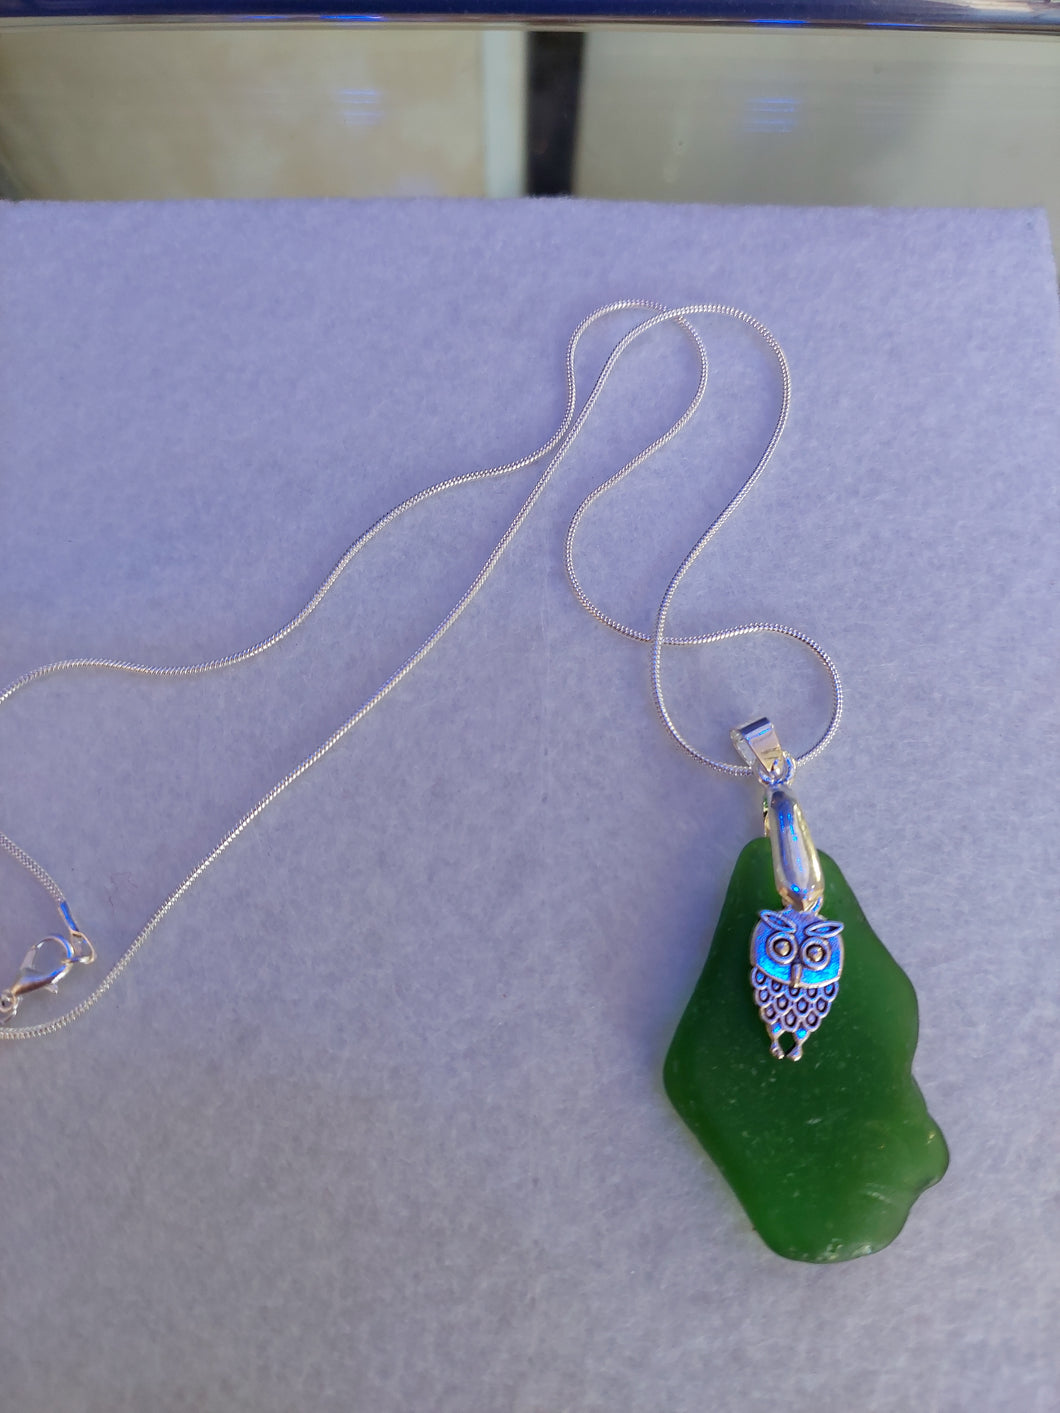 Seaglass Necklace With Owl Charm